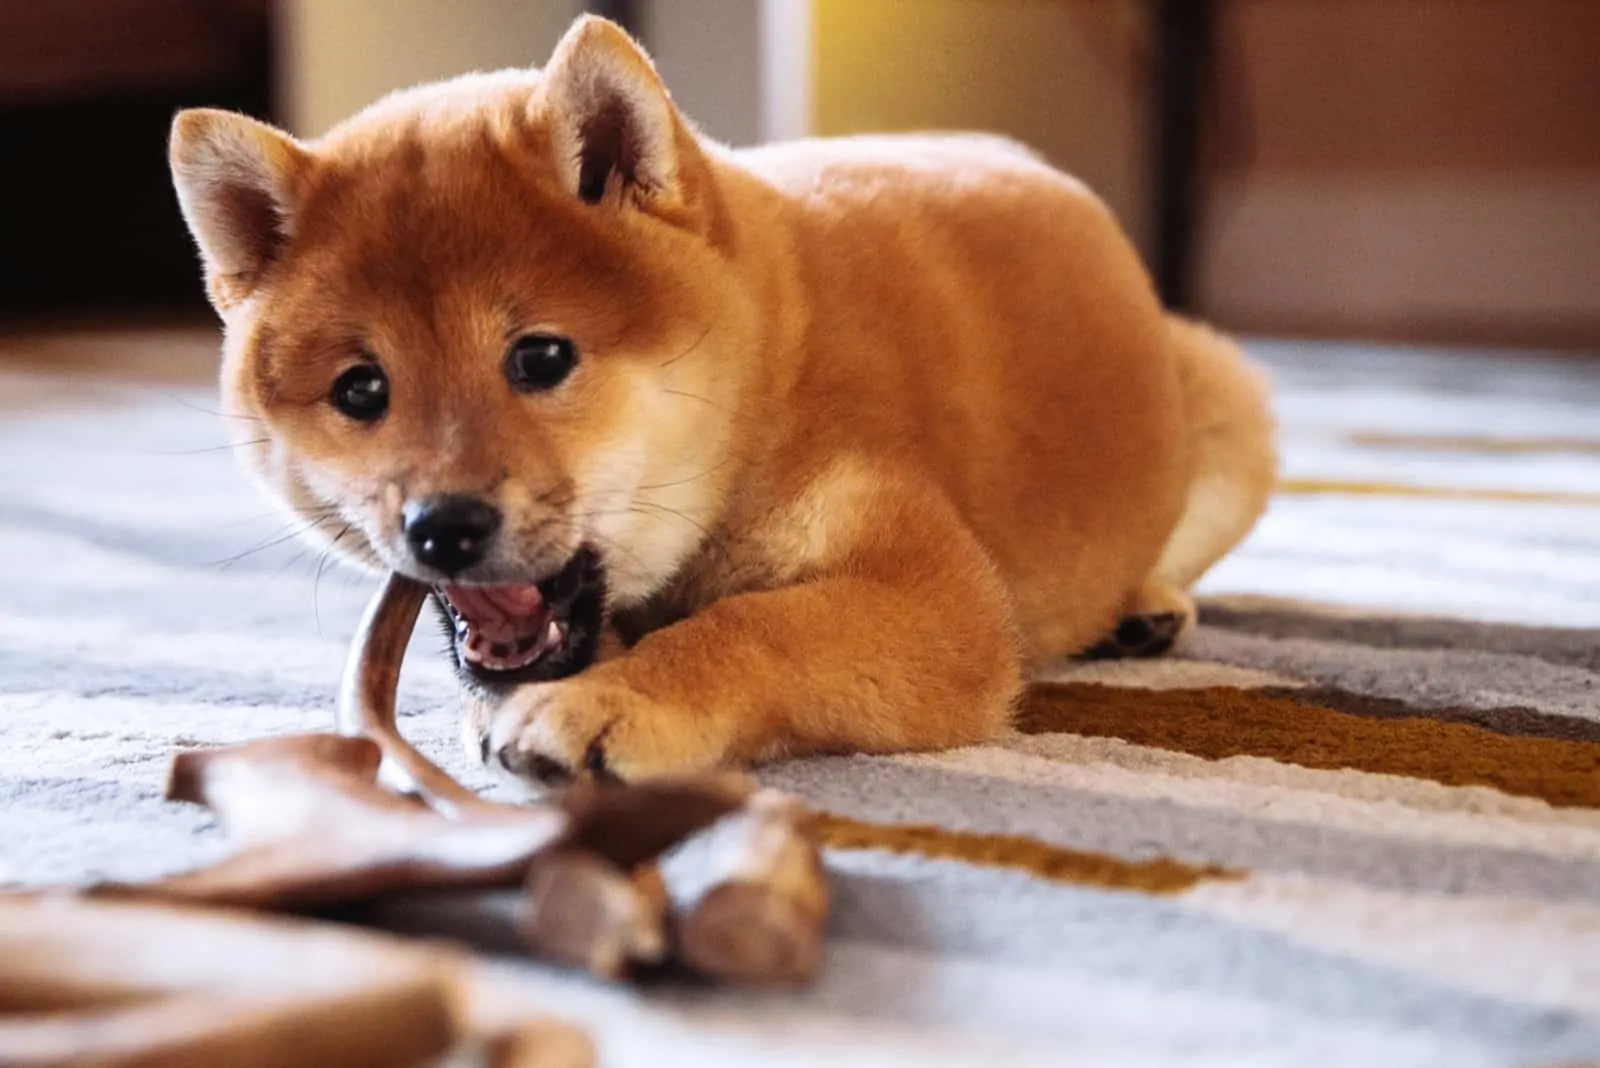 Shiba Inu puppy lies on the floor and eats